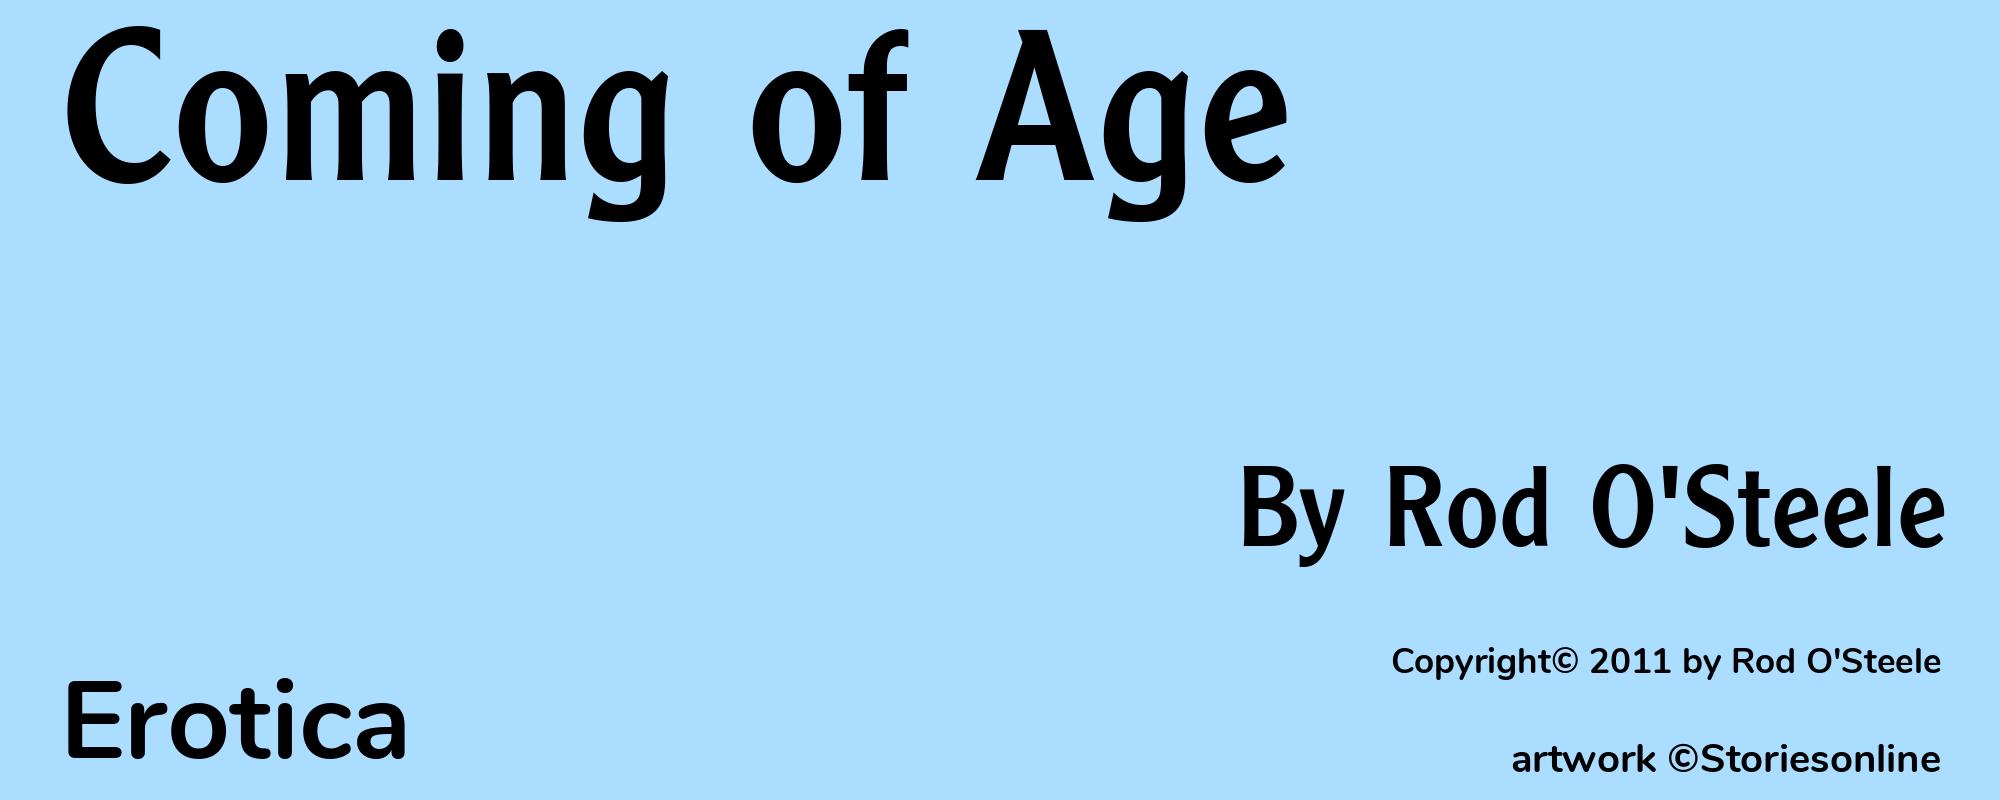 Coming of Age - Cover